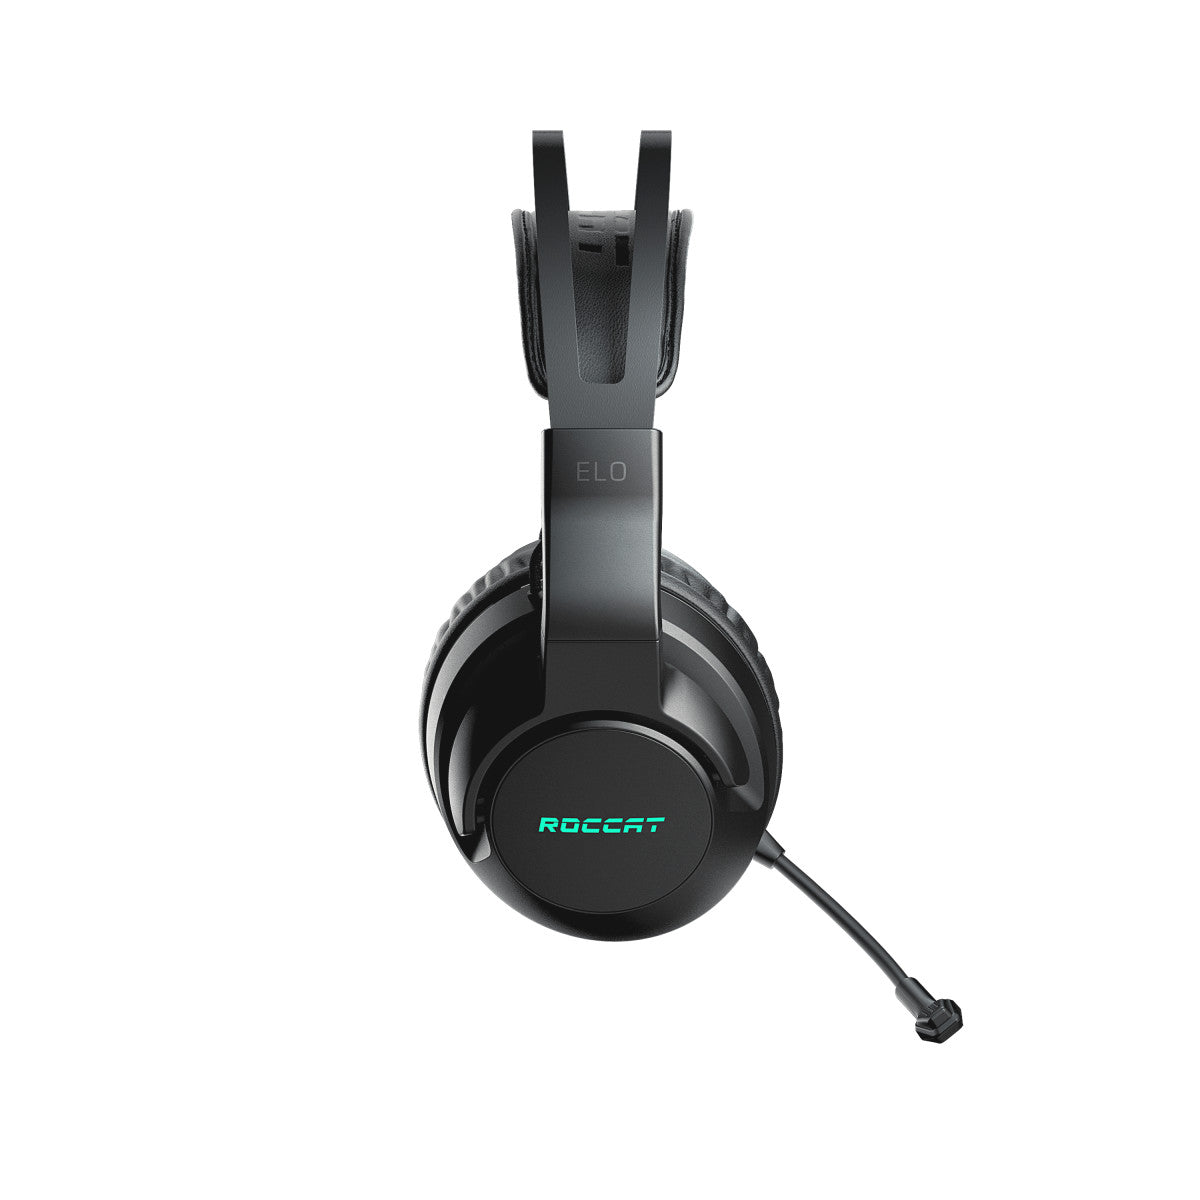 Roccat ELO 7.1 Air Wireless Black Headset side view and mic